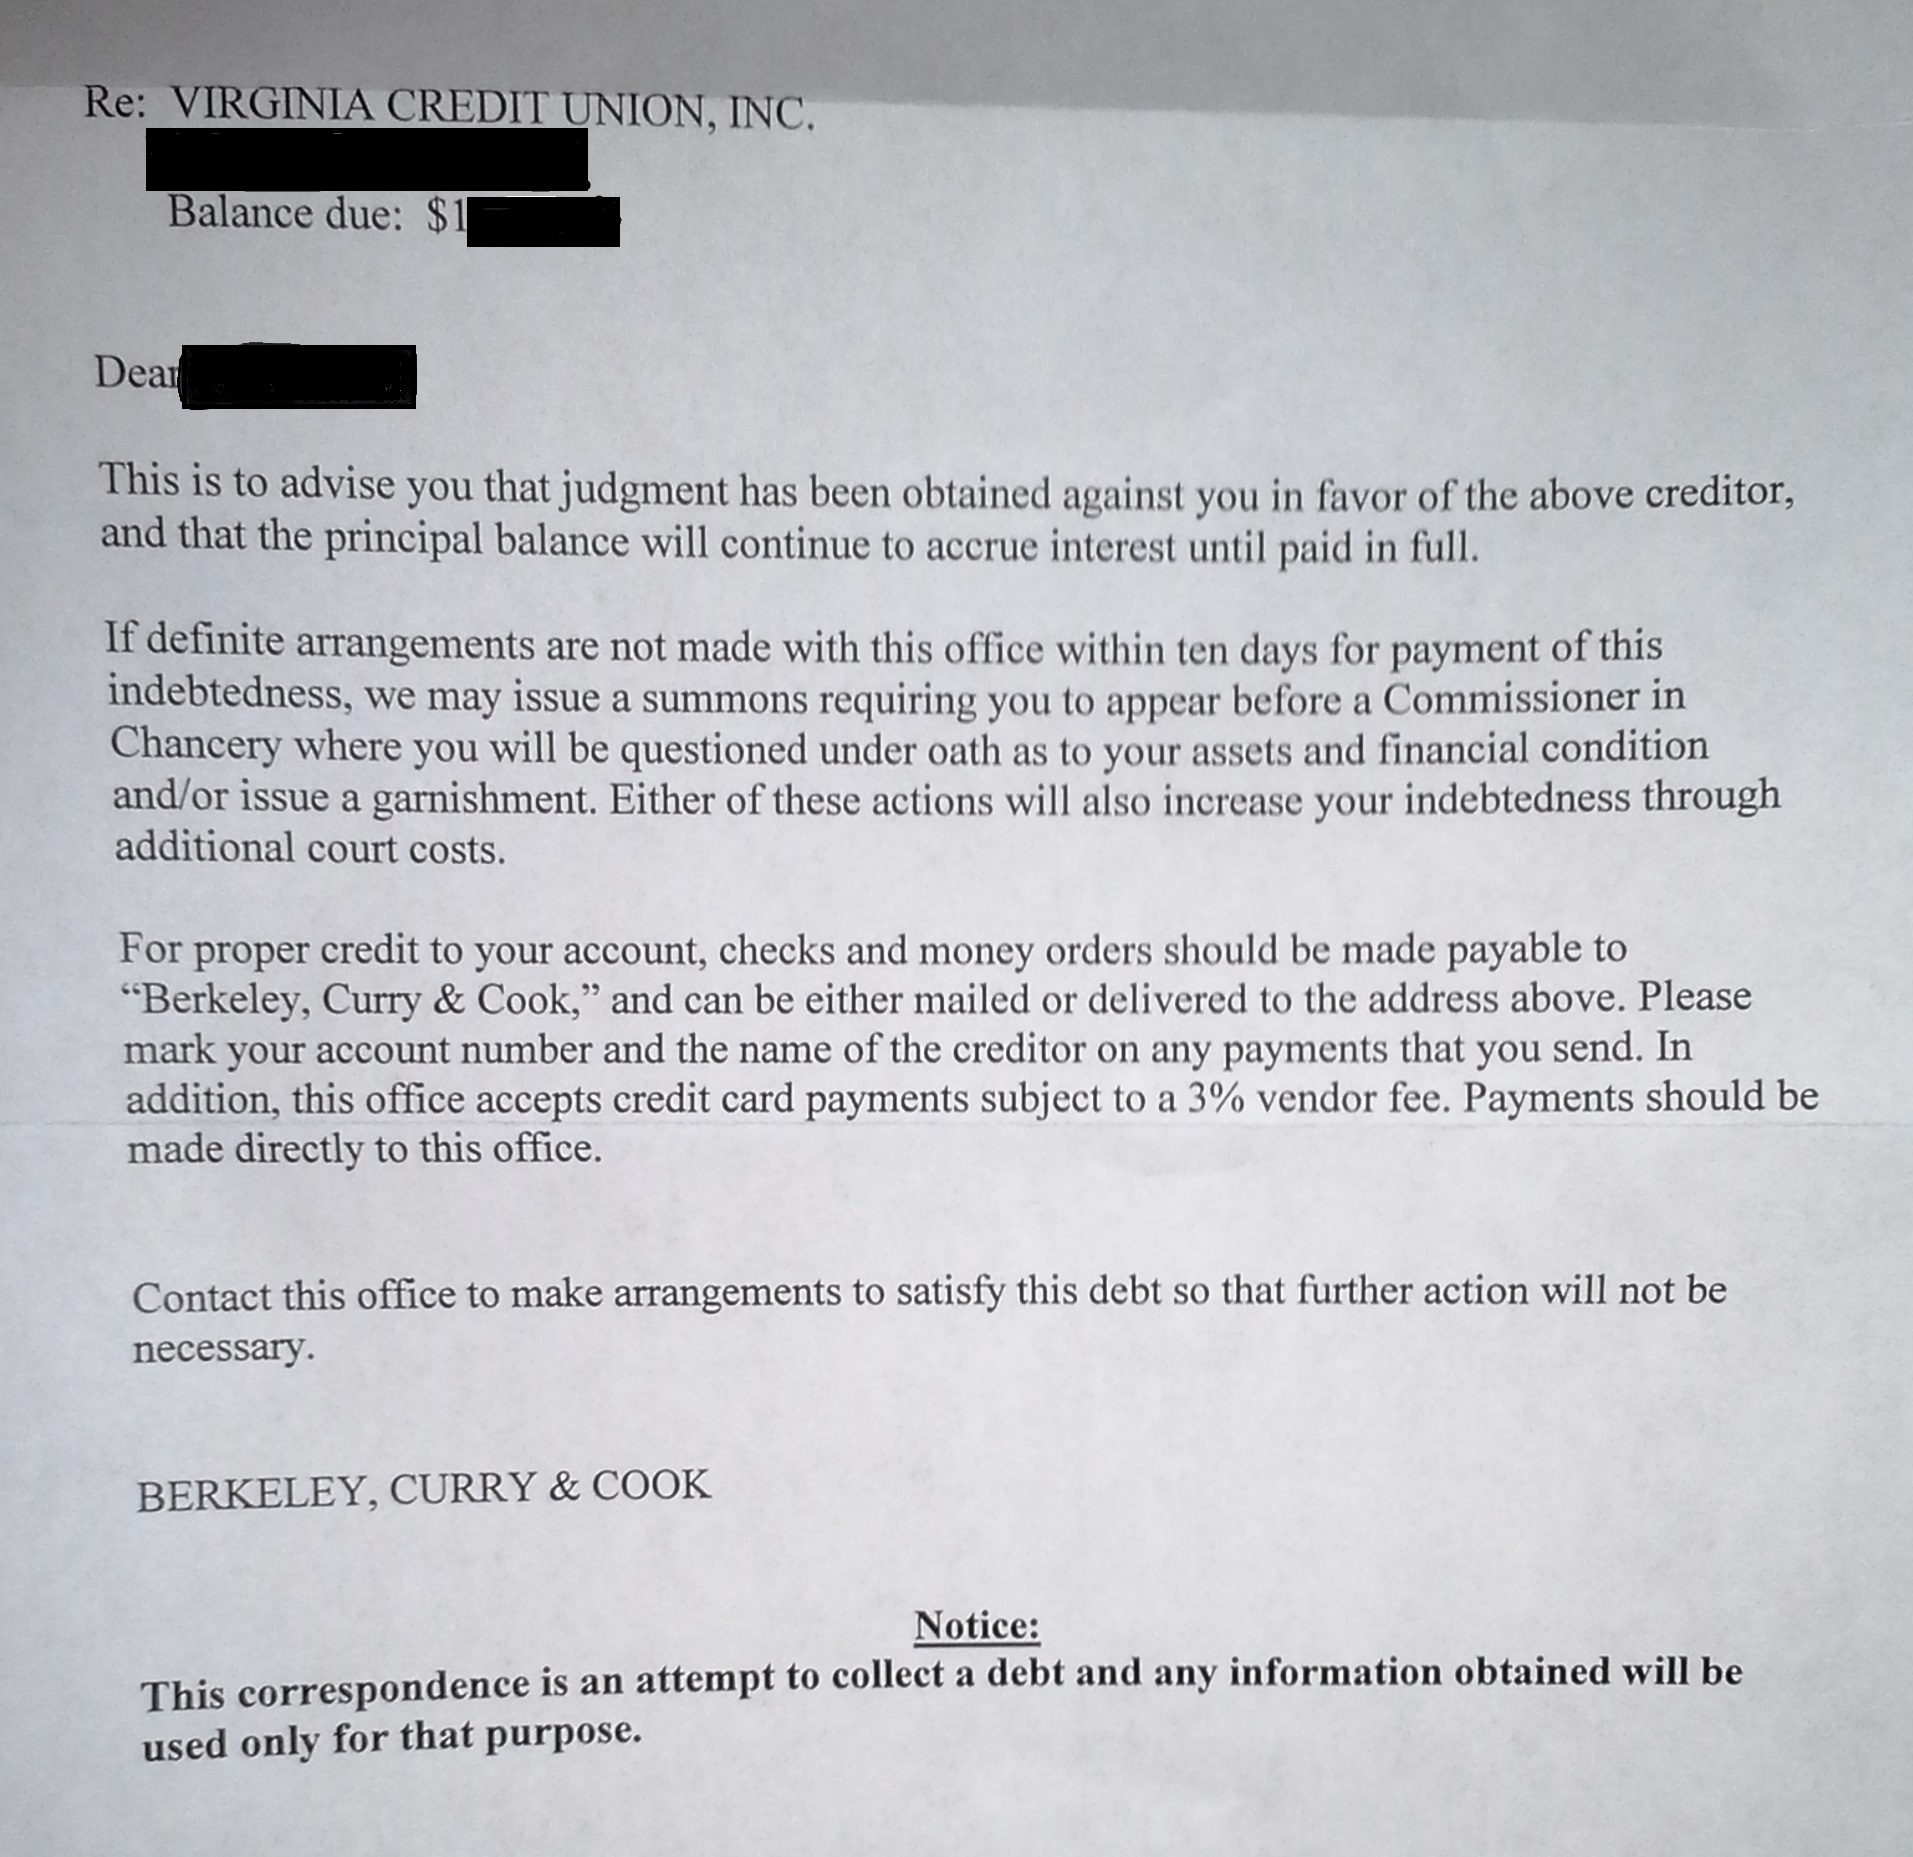 Letter from VACU attorneys, Berkeley, Curry and Cook